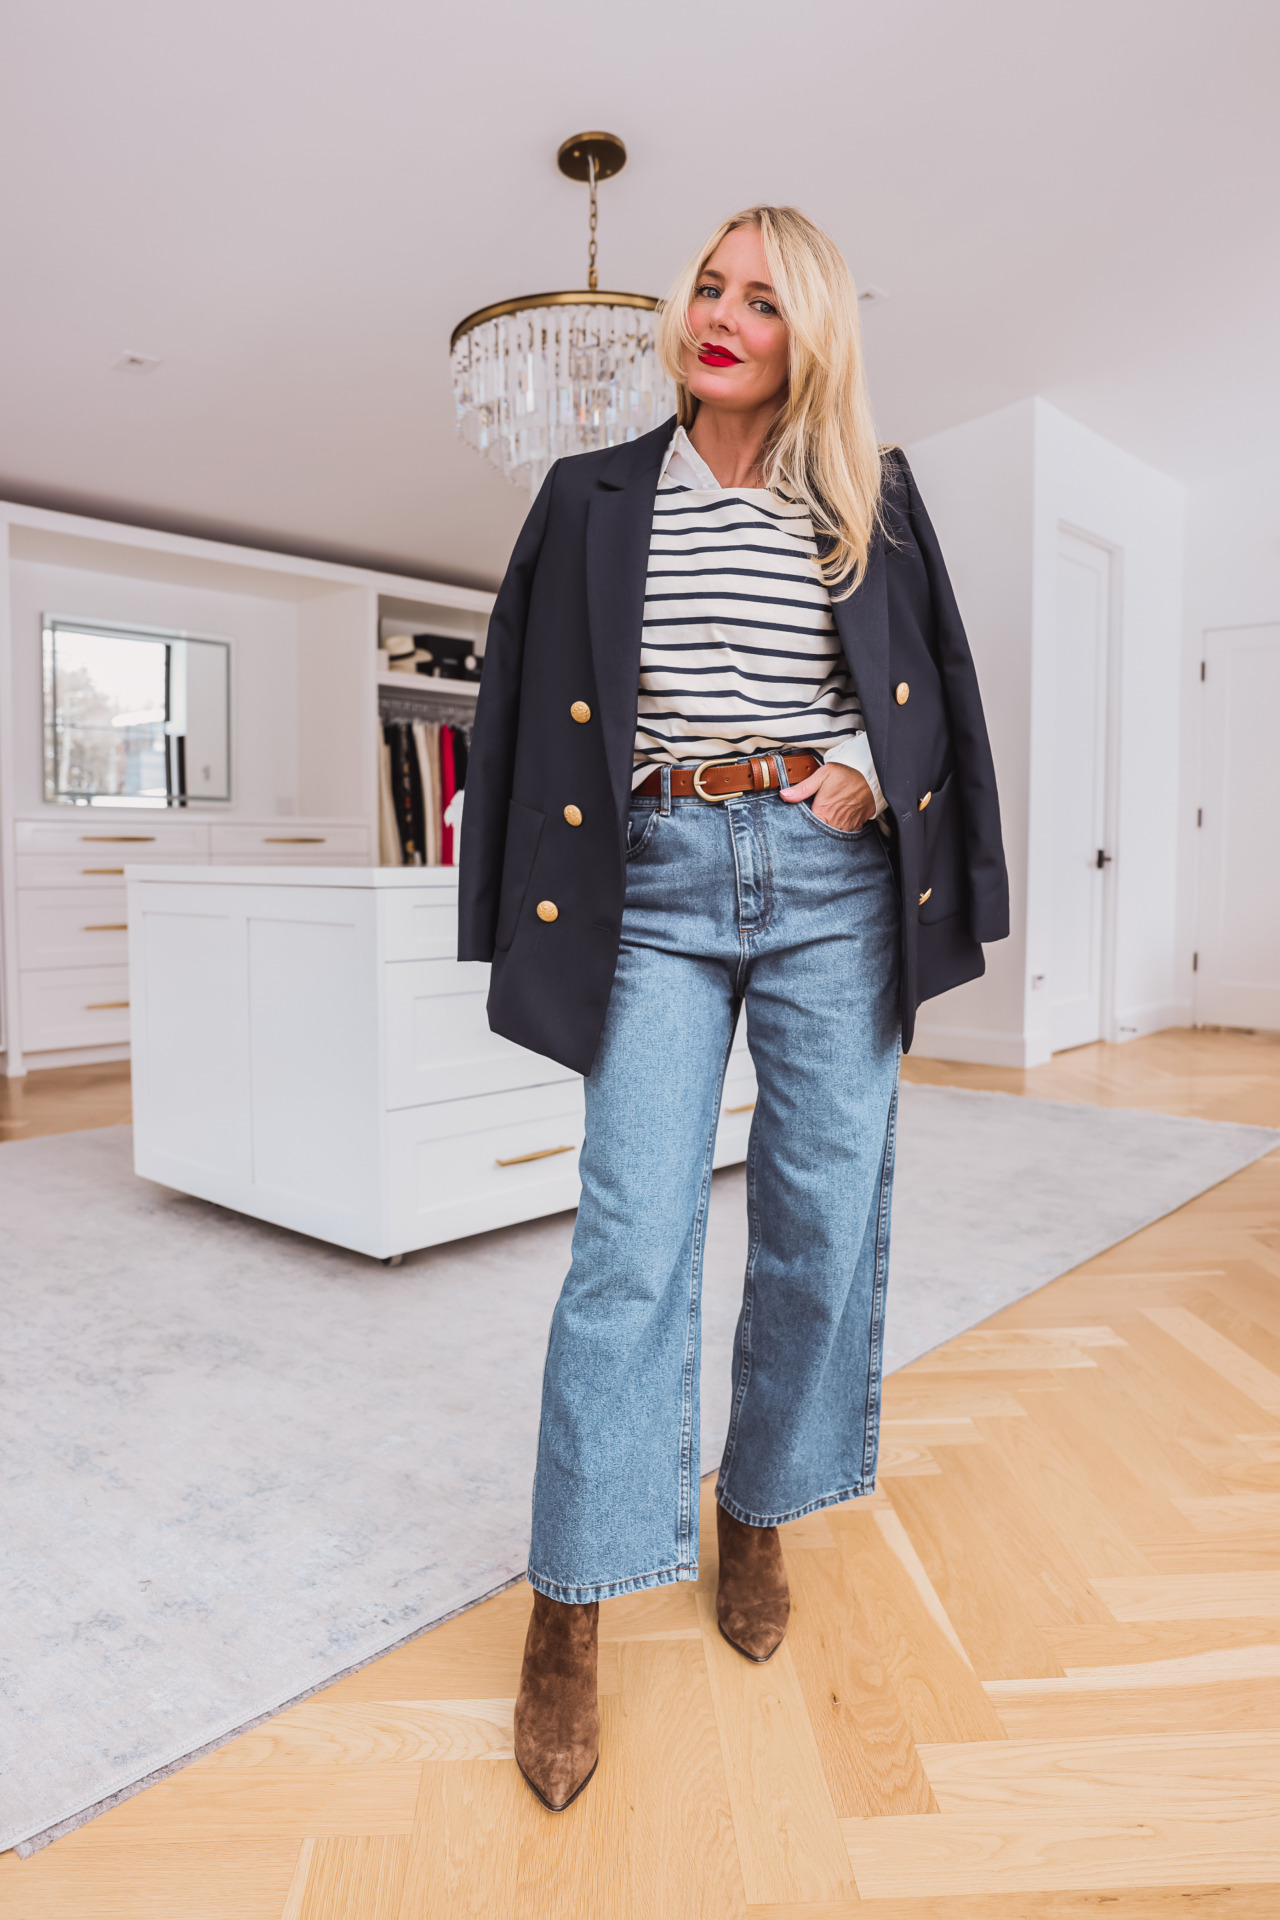 How to Style Jeans and Heels